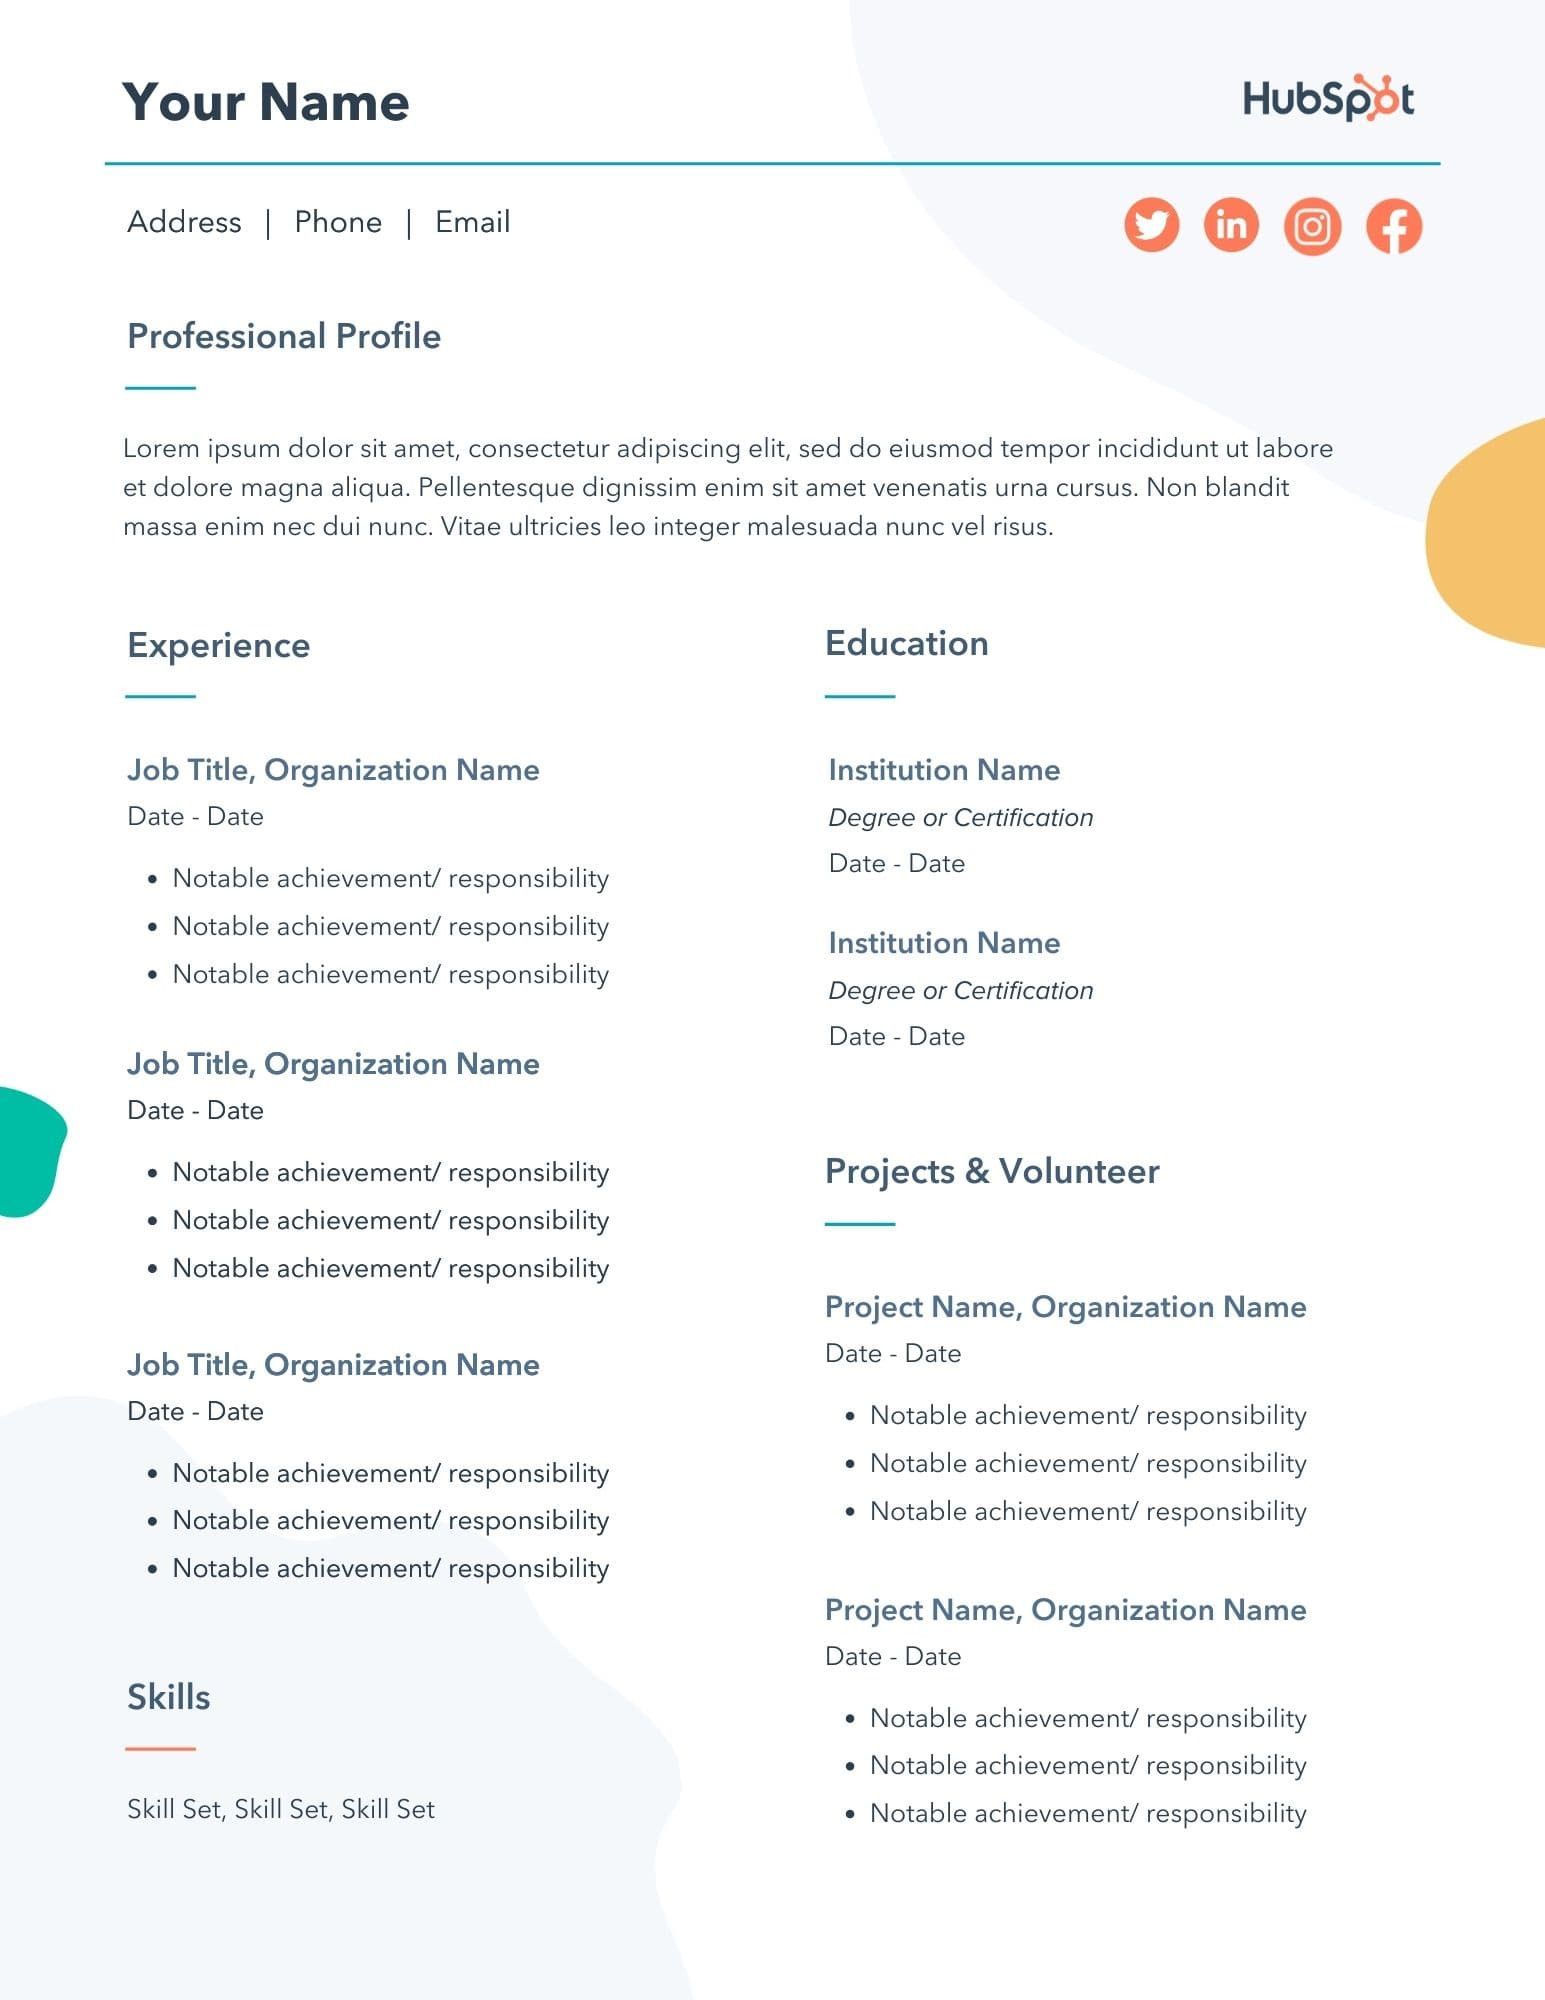 Resume Template for someone who Has Never Had A Job 29 Free Resume Templates for Microsoft Word (& How to Make Your Own)